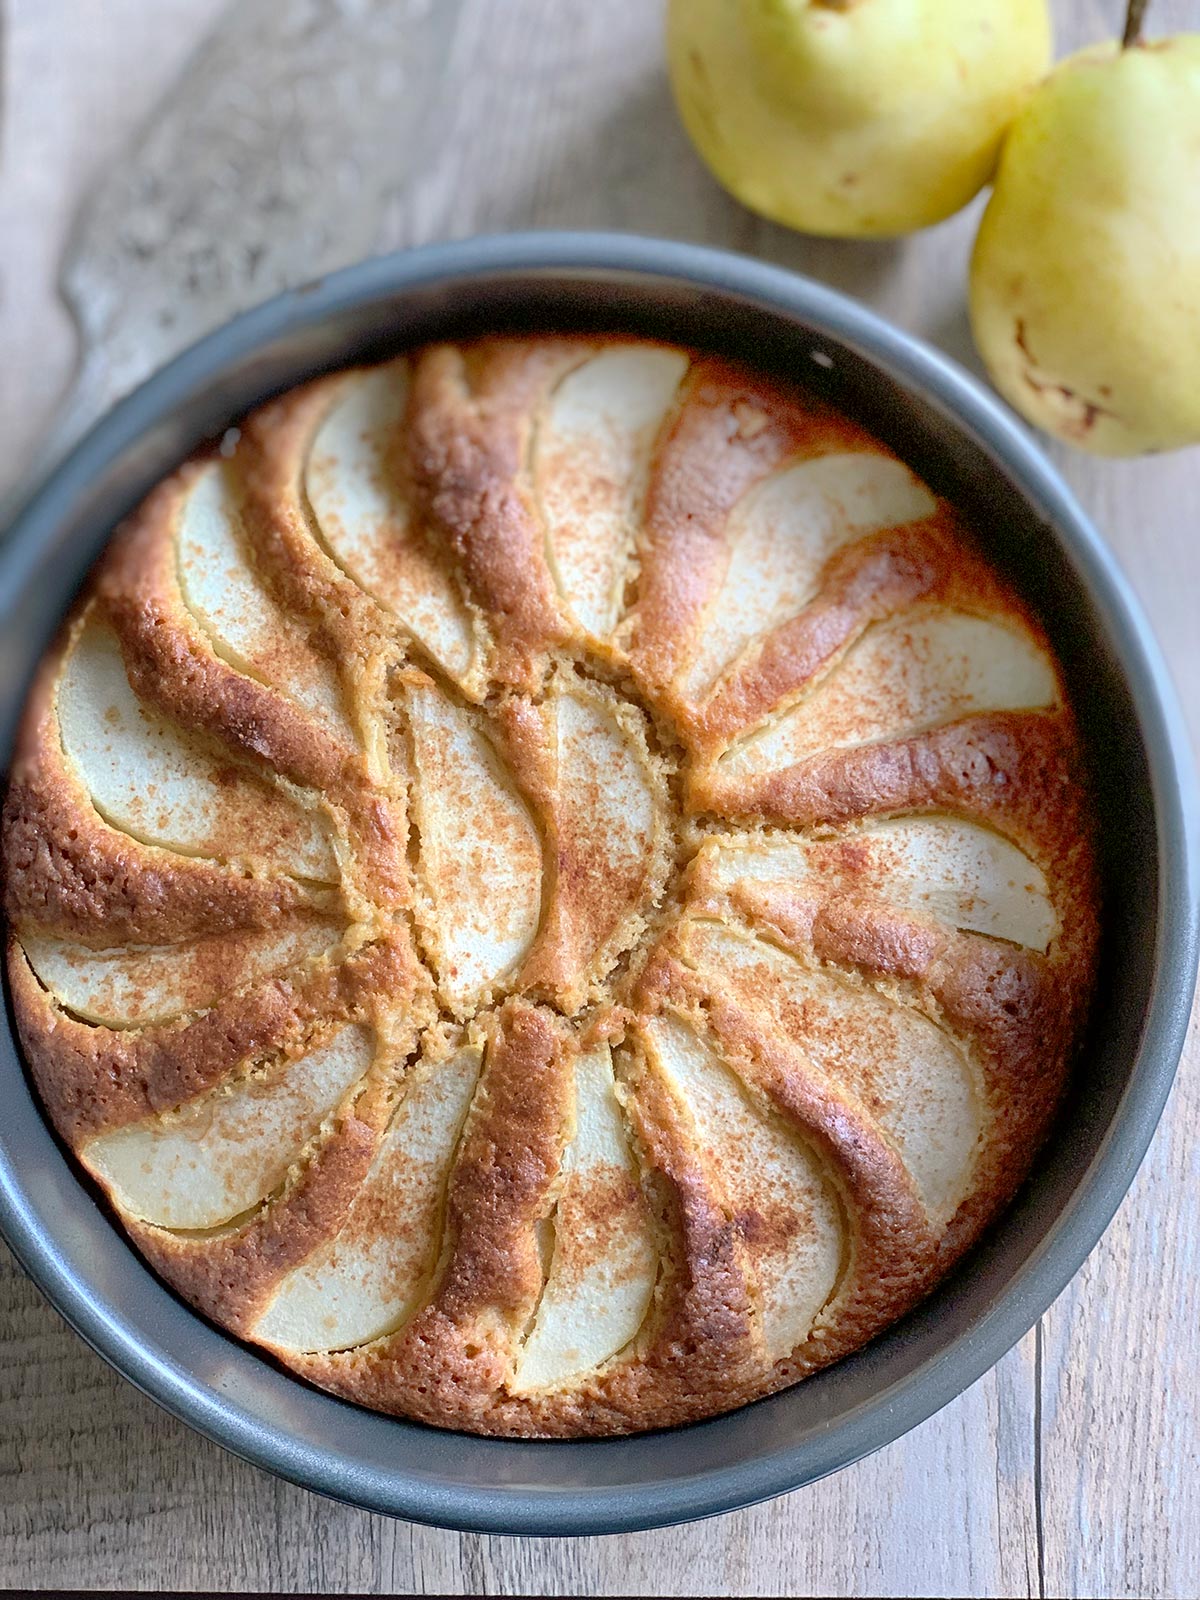 Pear cake still in baking pan with some whole pears on the side.